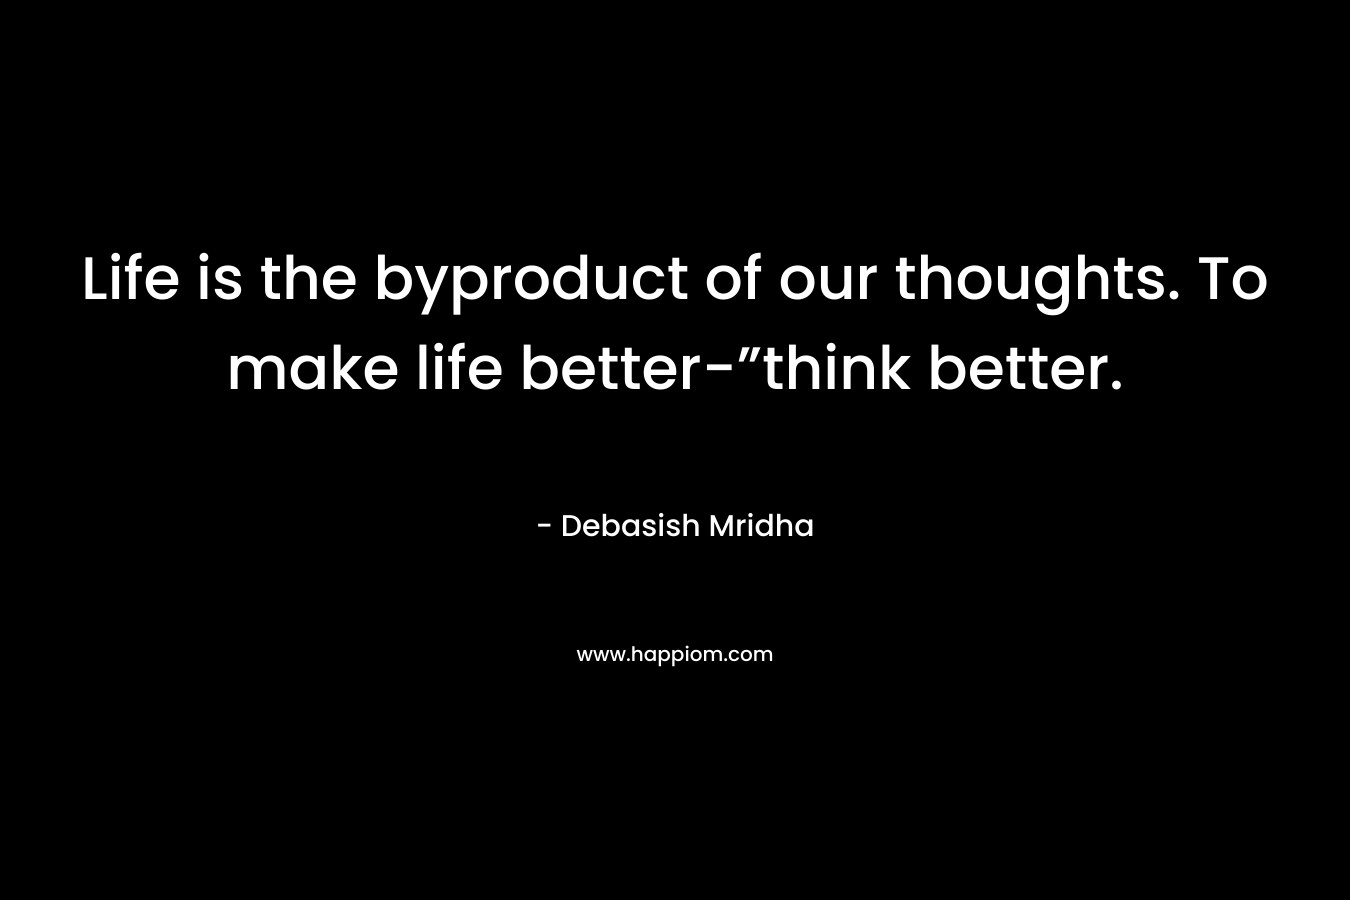 Life is the byproduct of our thoughts. To make life better-”think better. – Debasish Mridha